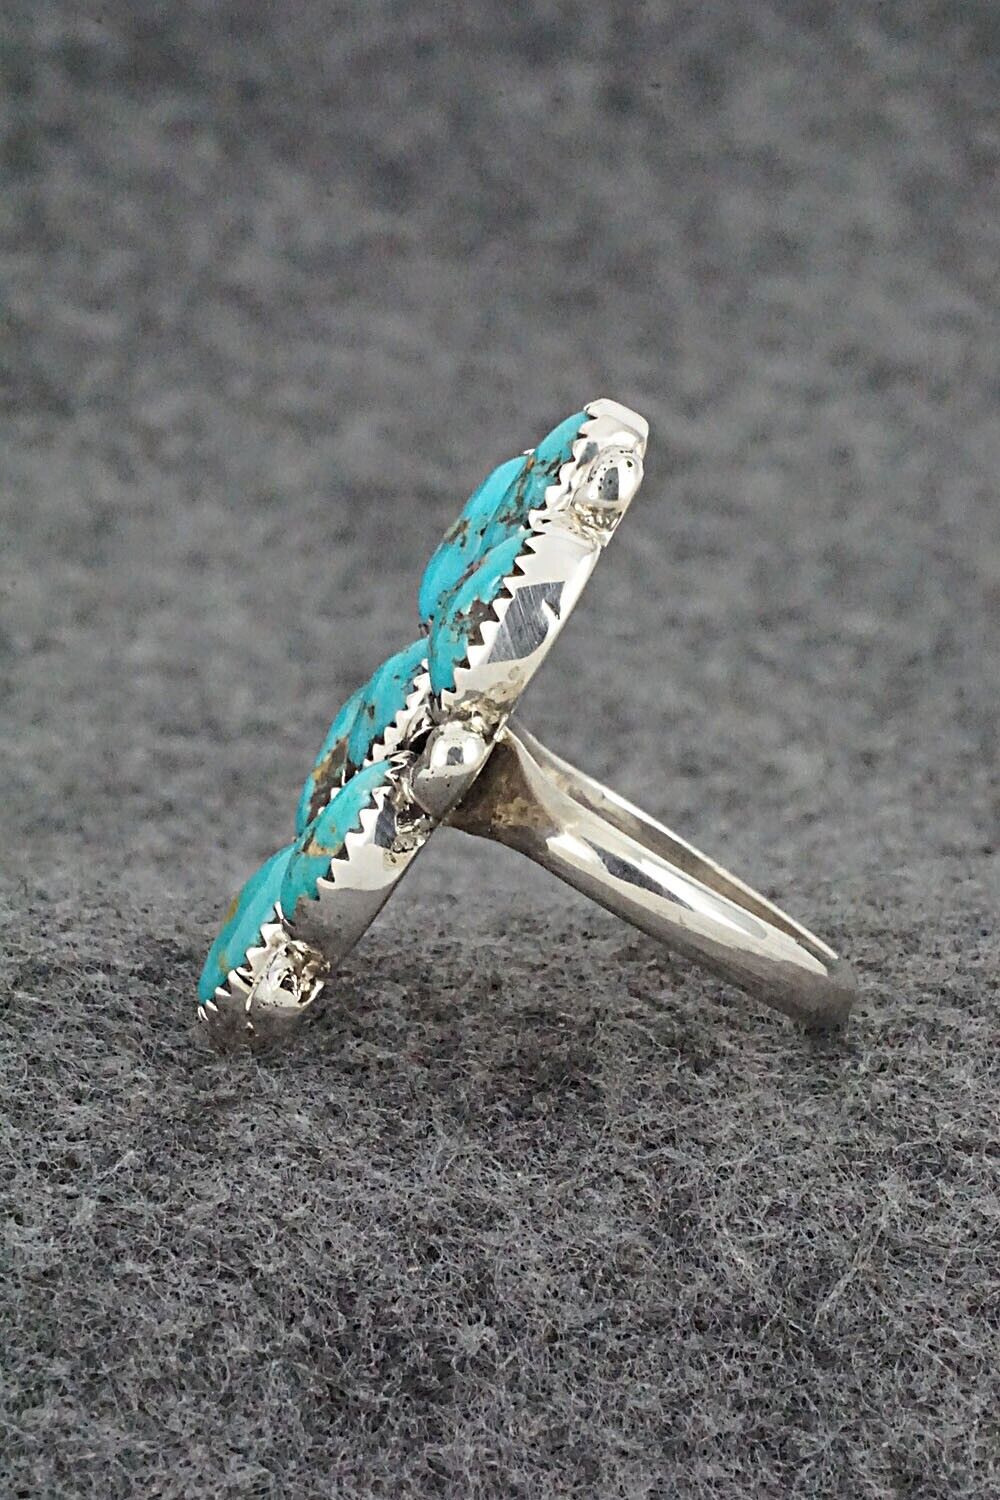 Turquoise & Sterling Silver Ring - Priscilla Reeder - Size 9.25